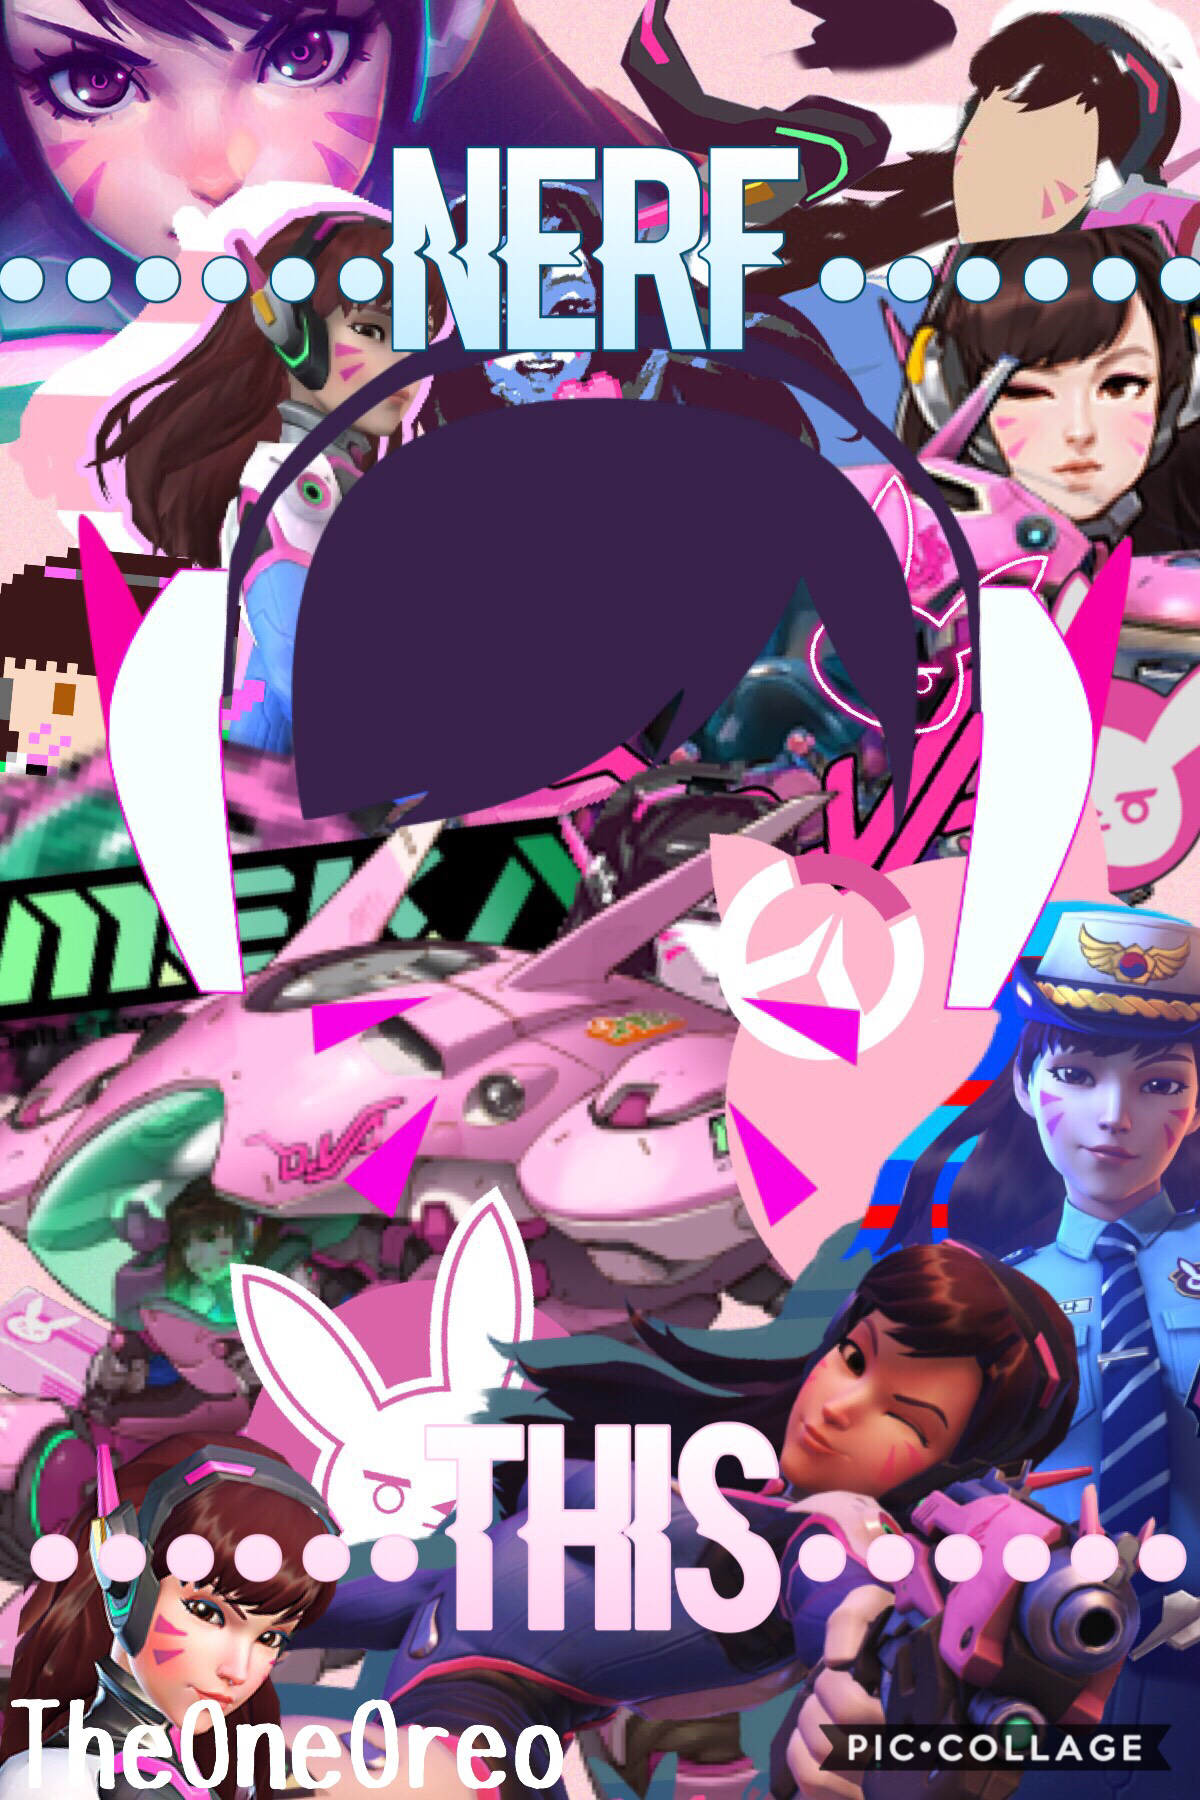 👾D.VA👾 (TAP💝)

    This is the second overwatch edit
in my series.

I’m not a huge D.va fan,
but her design is so cute! 
What do you guys think?